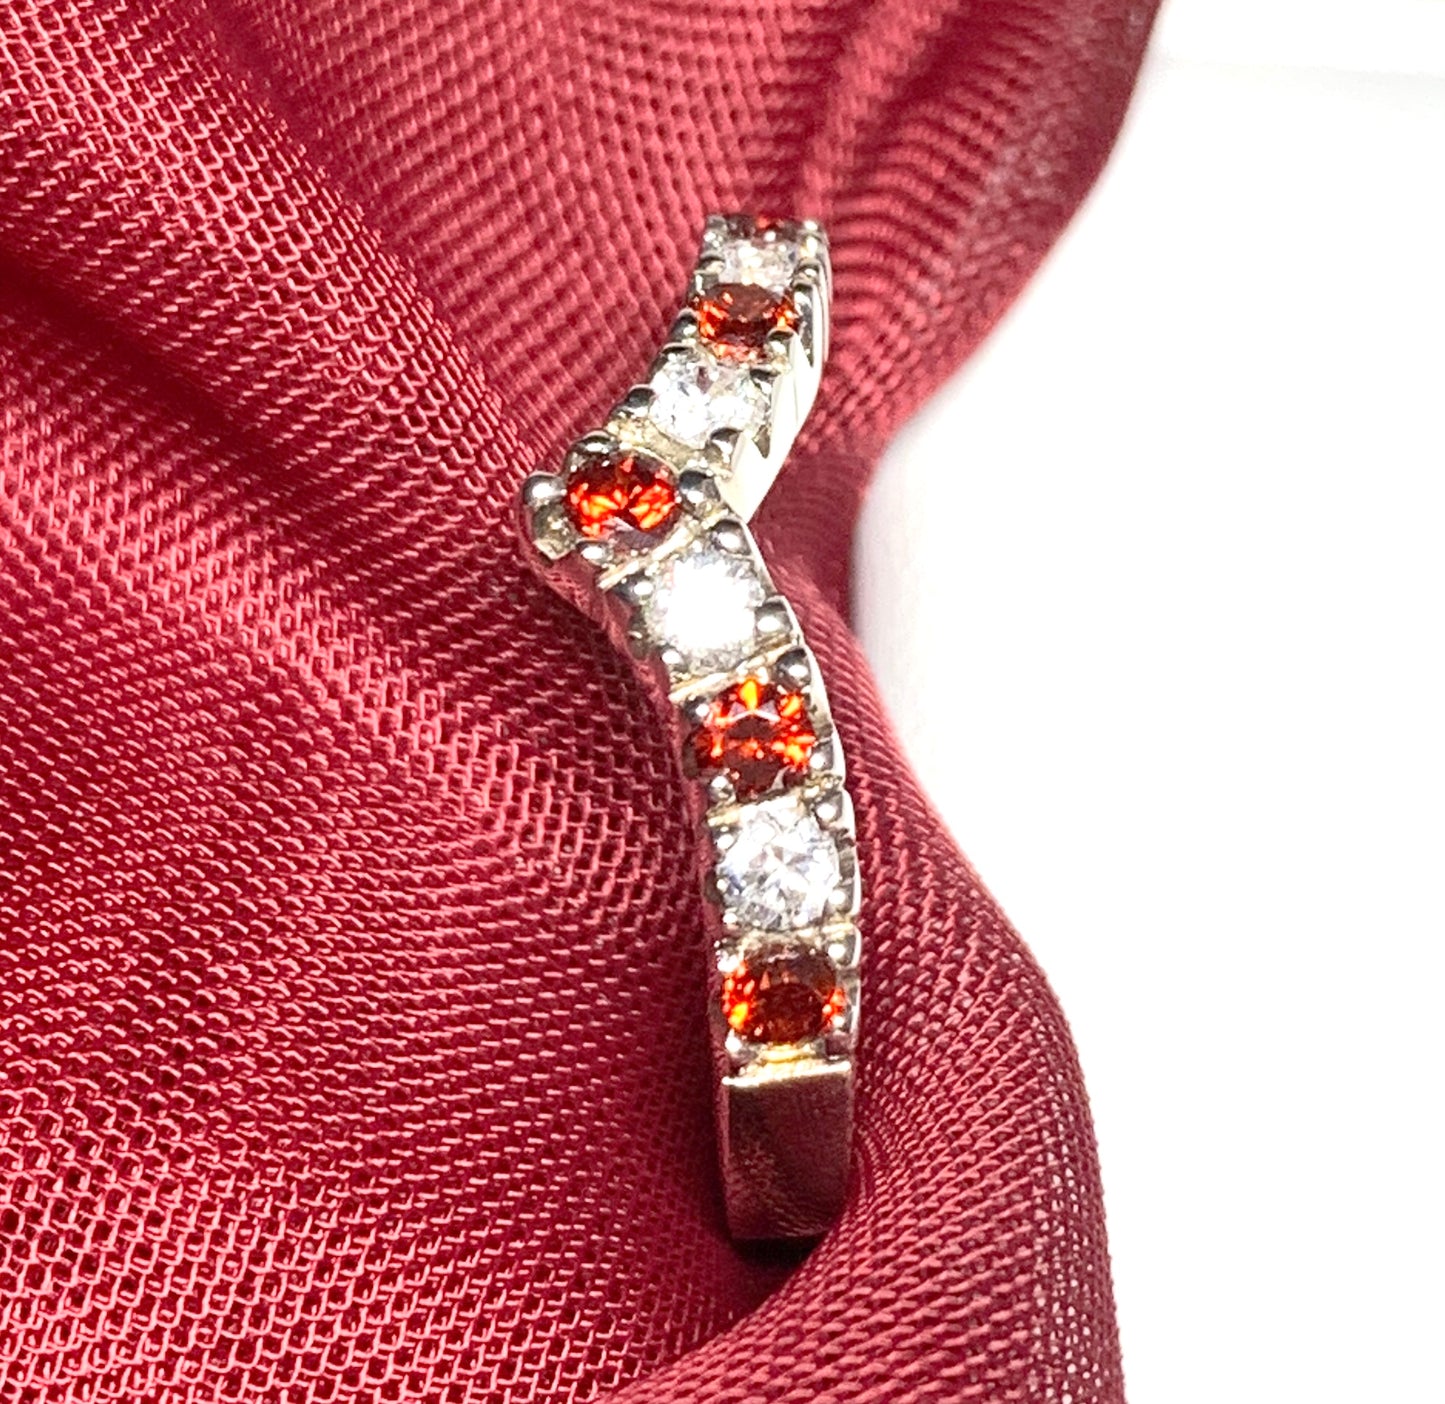 Garnet coloured wishbone ring sterling silver with cubic zirconia stones